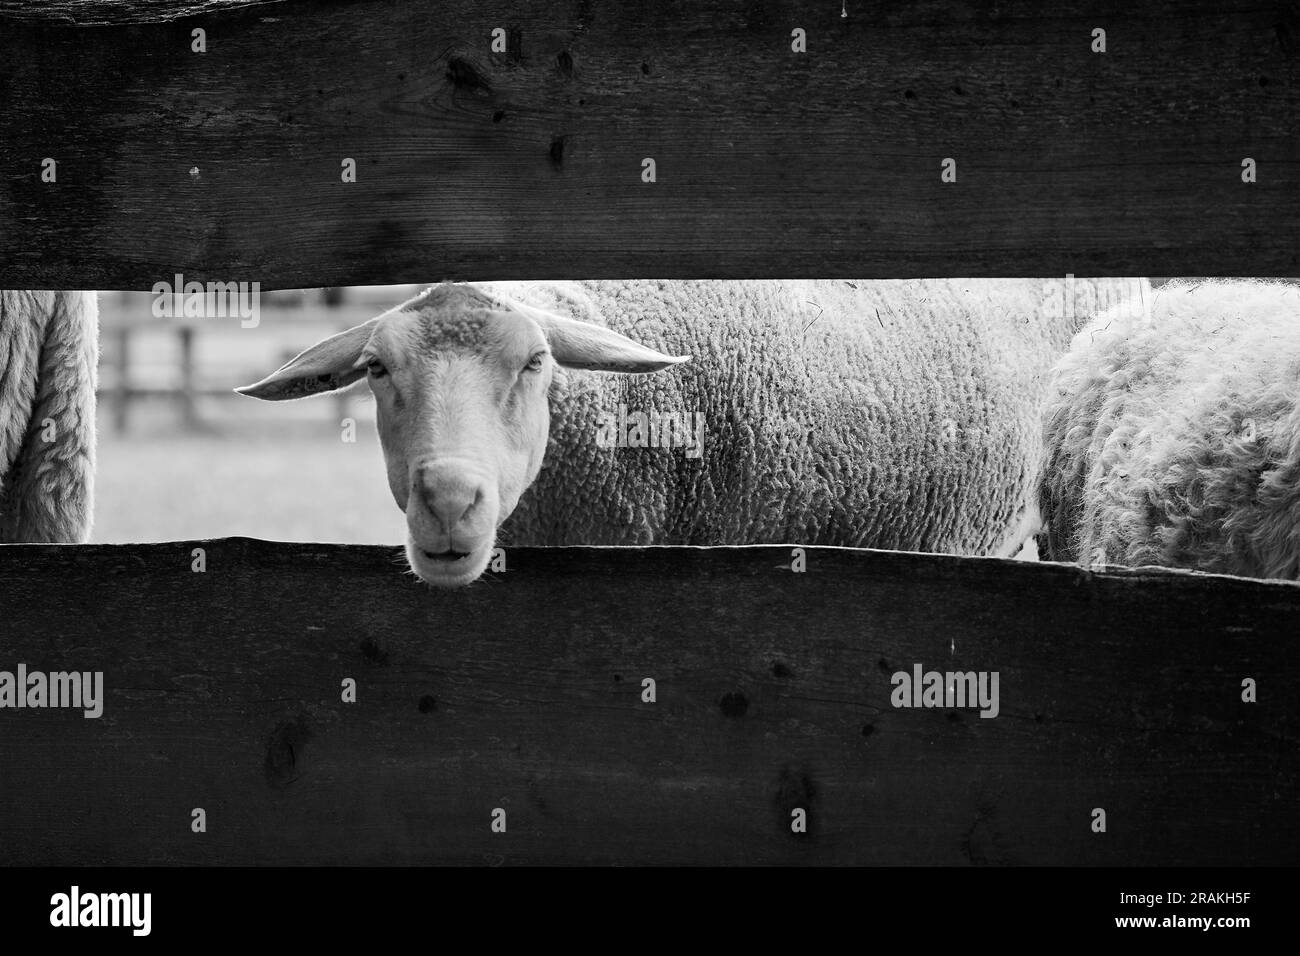 Ewe people Black and White Stock Photos & Images - Alamy